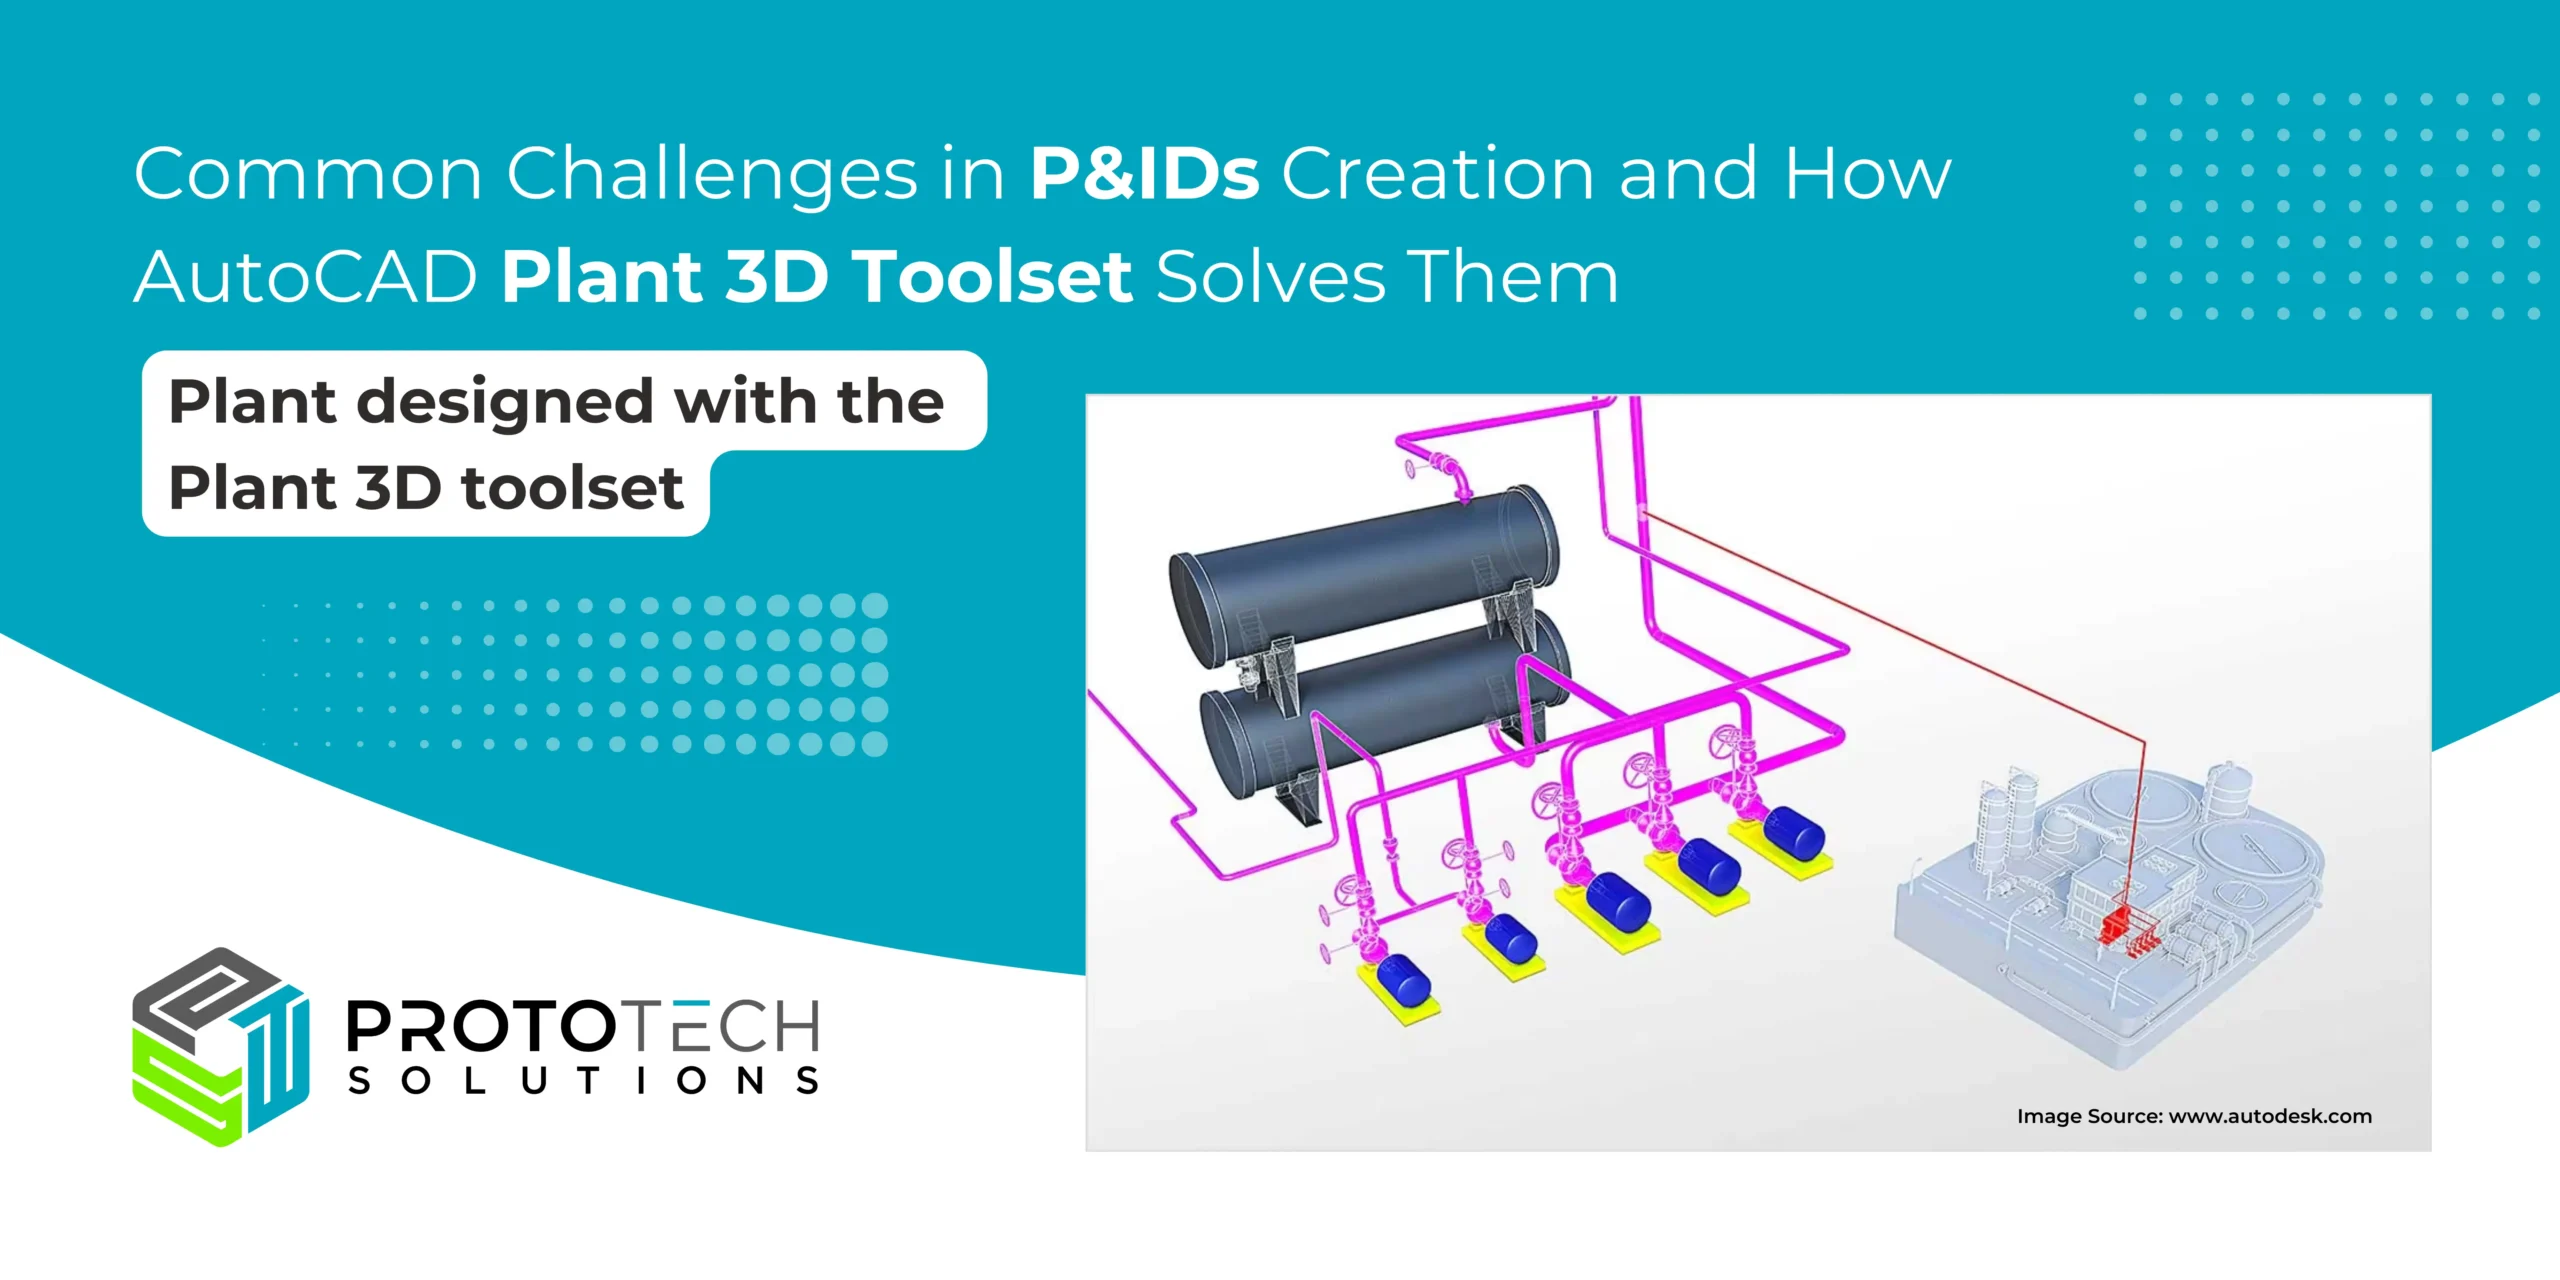 Common Challenges in P&IDs Creation and How AutoCAD Plant 3D Toolset Solves Them